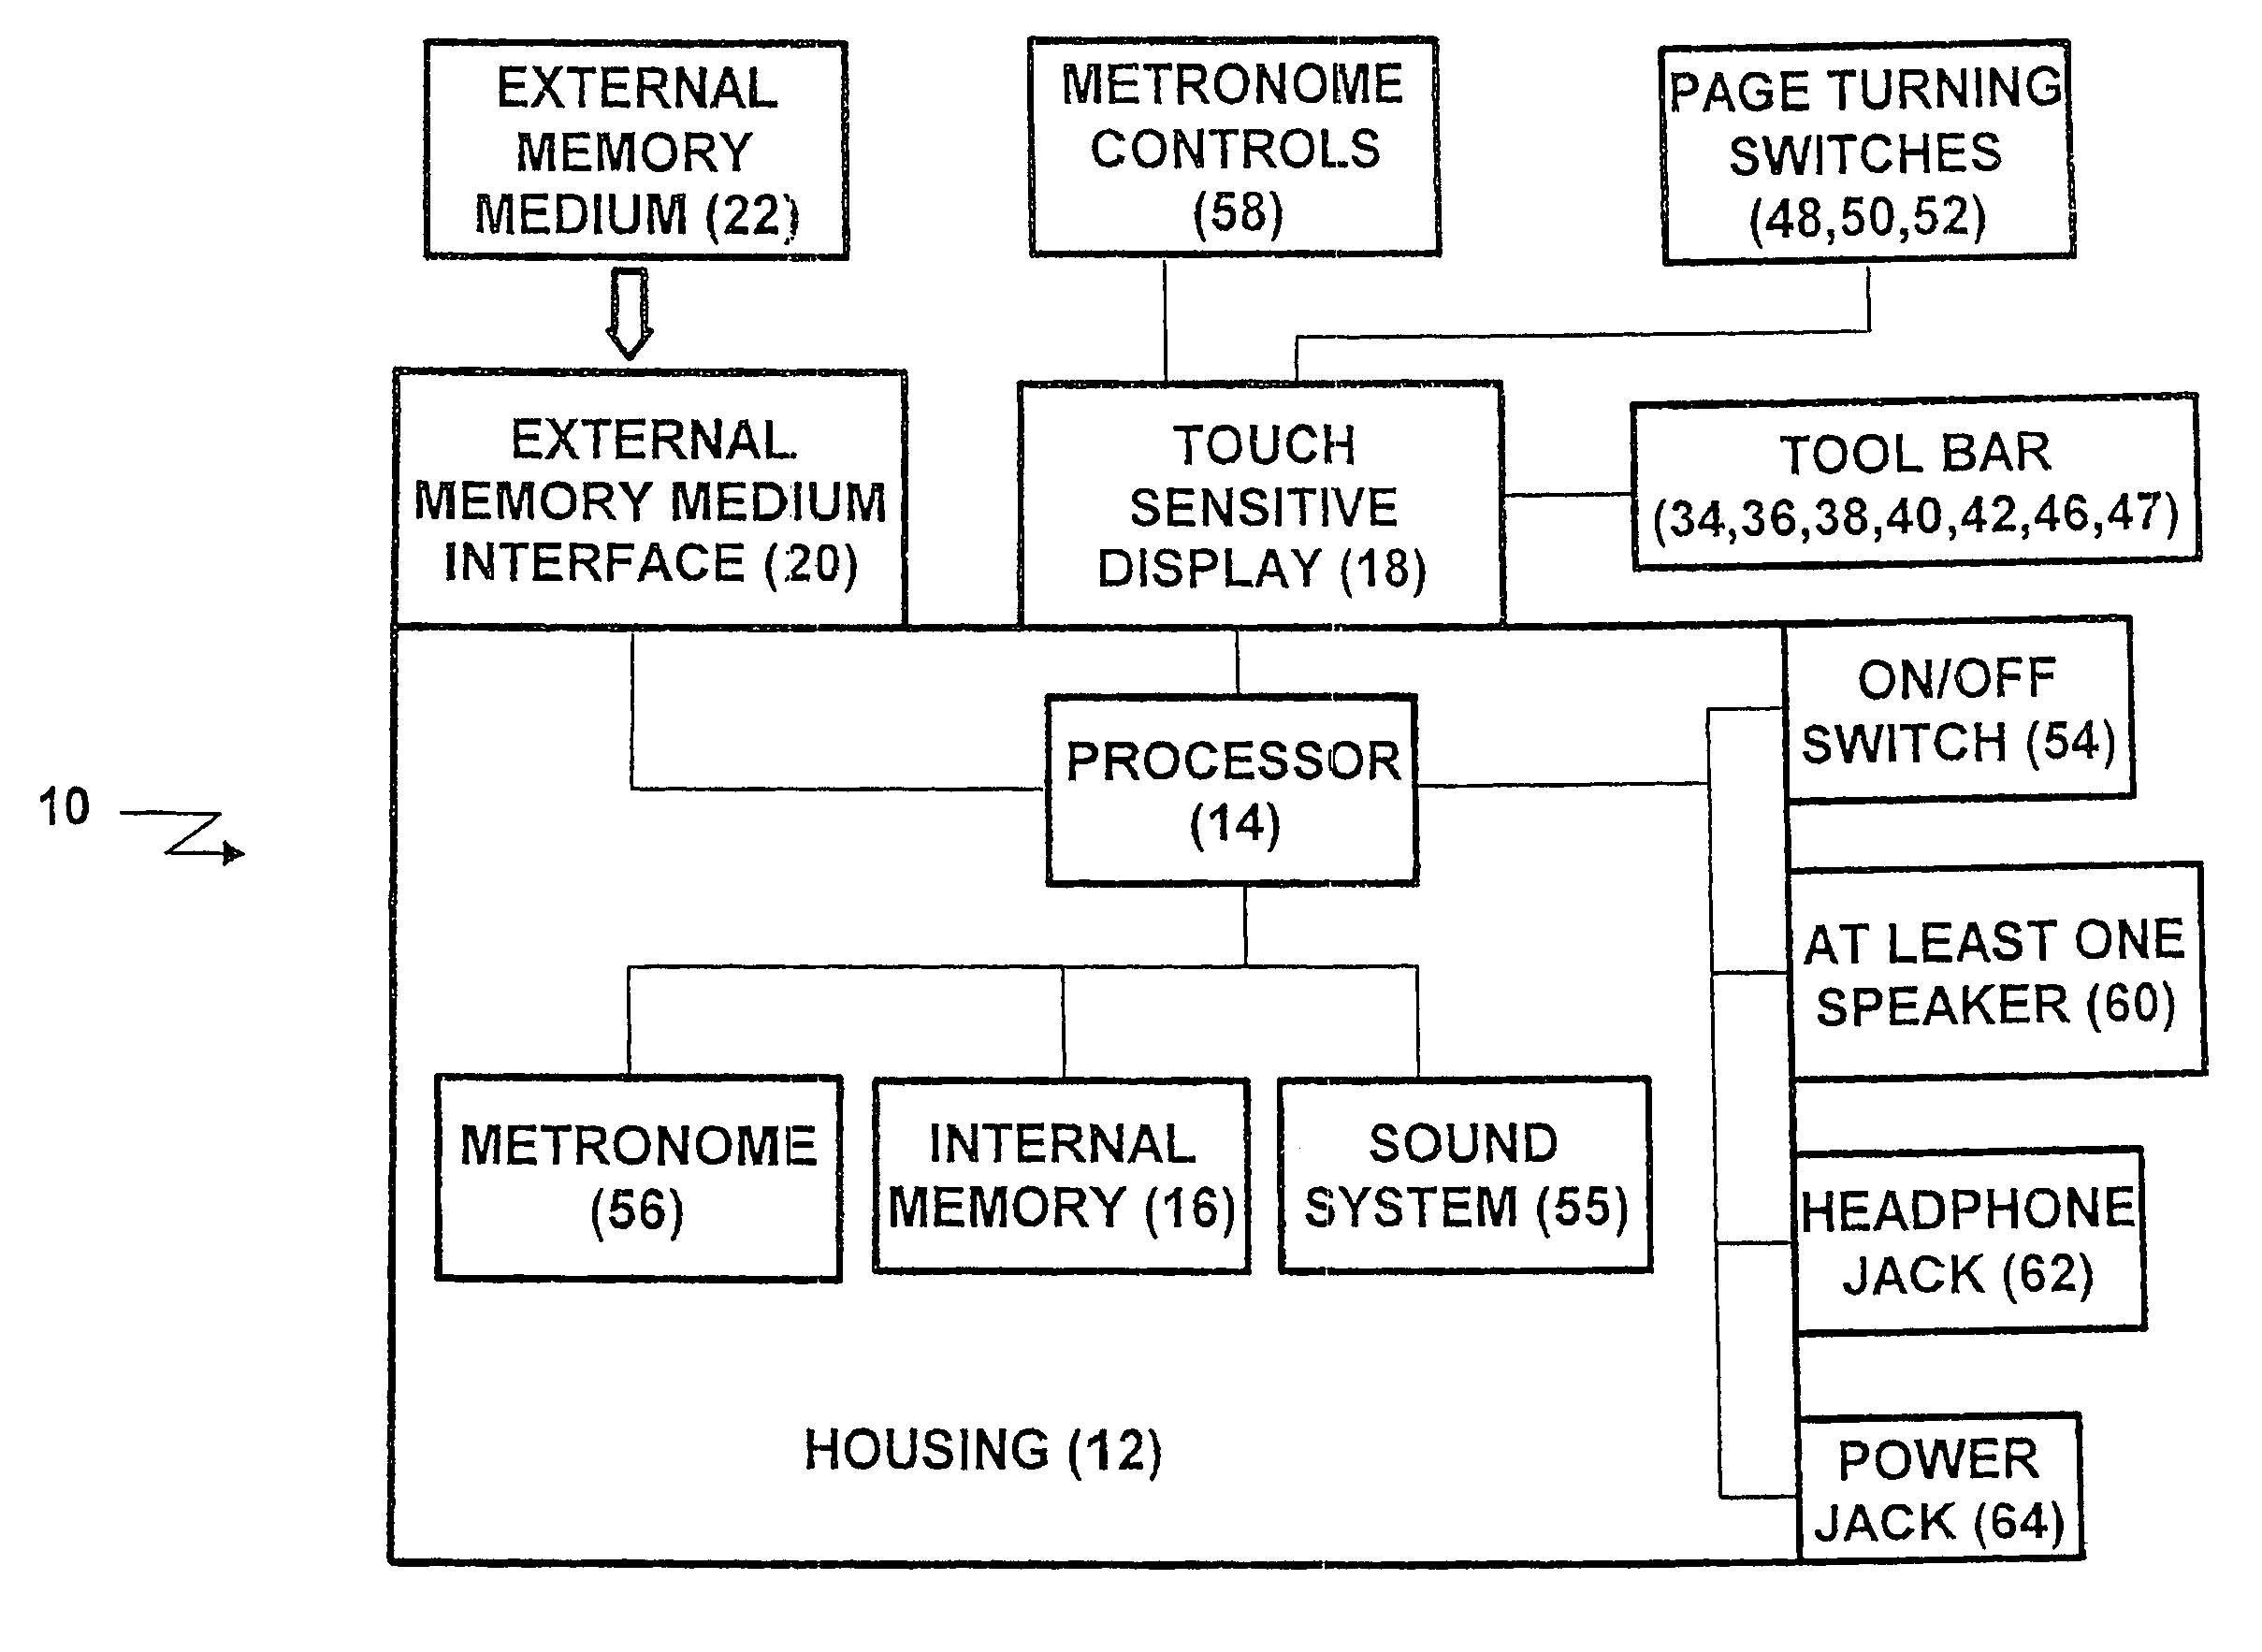 Portable electronic music score device for transporting, storing displaying, and annotating music scores